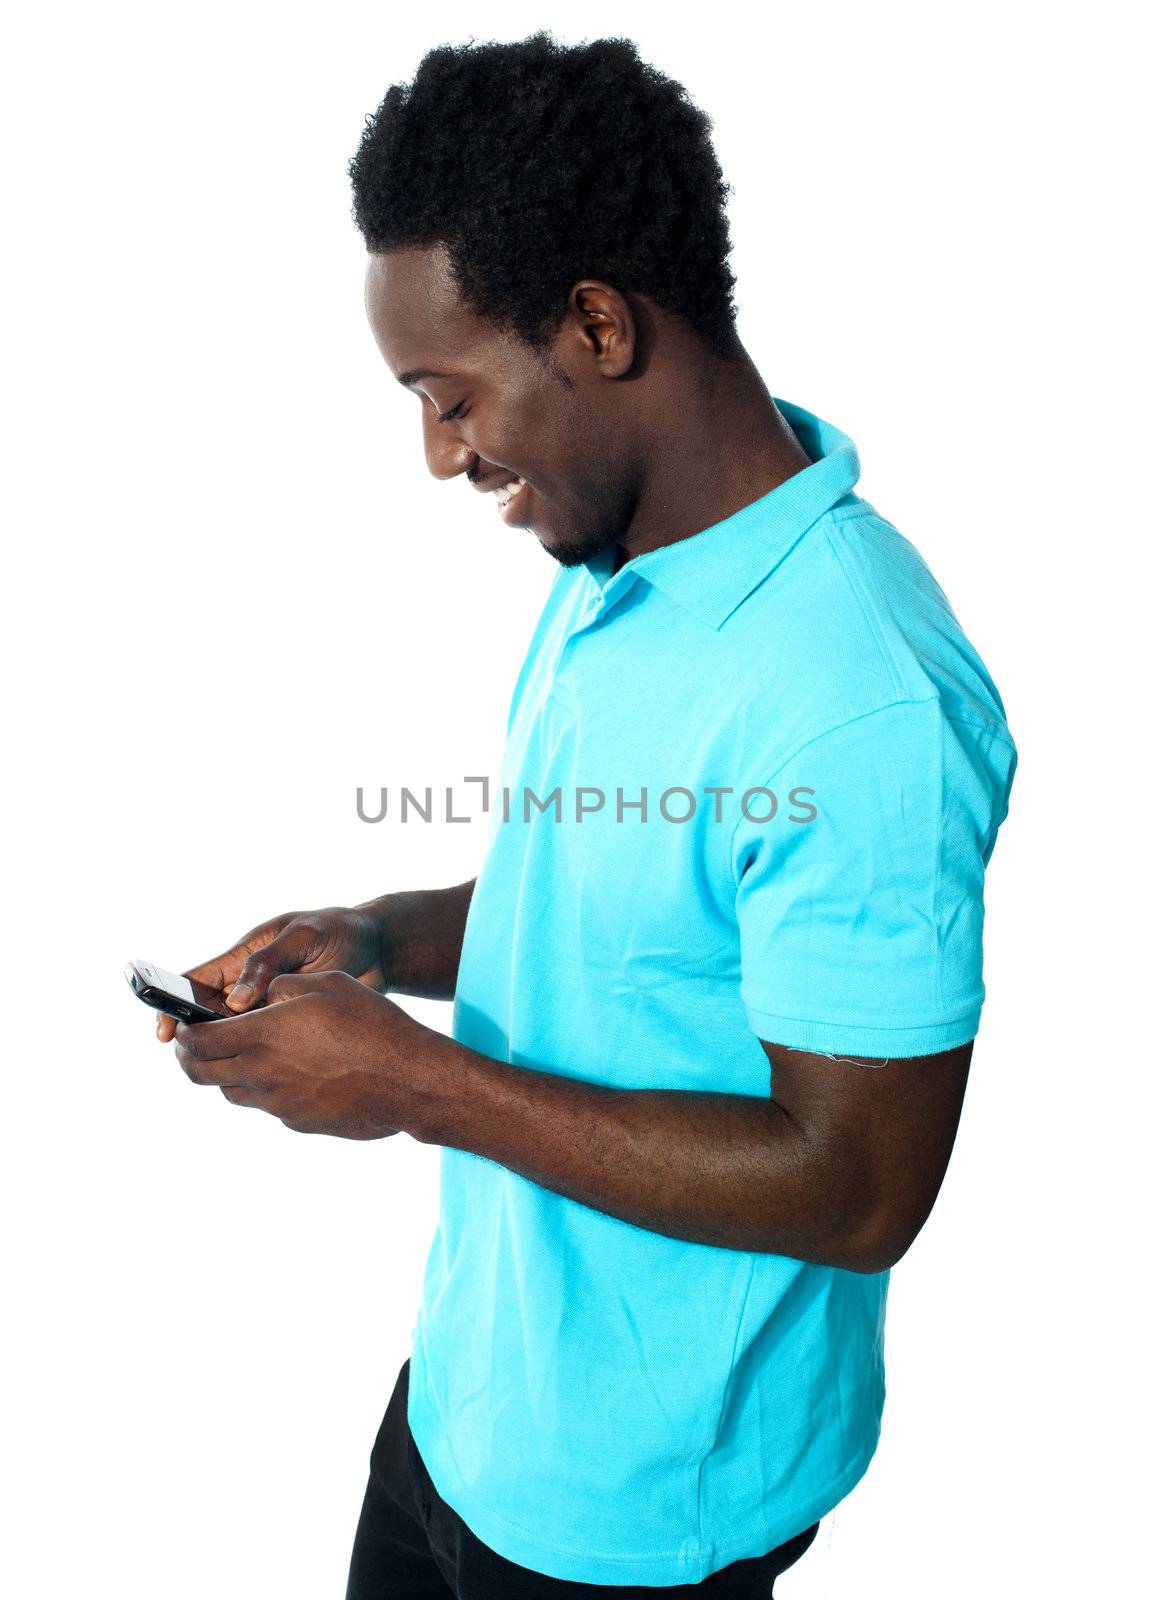 African boy busy messaging and smiling while reading message